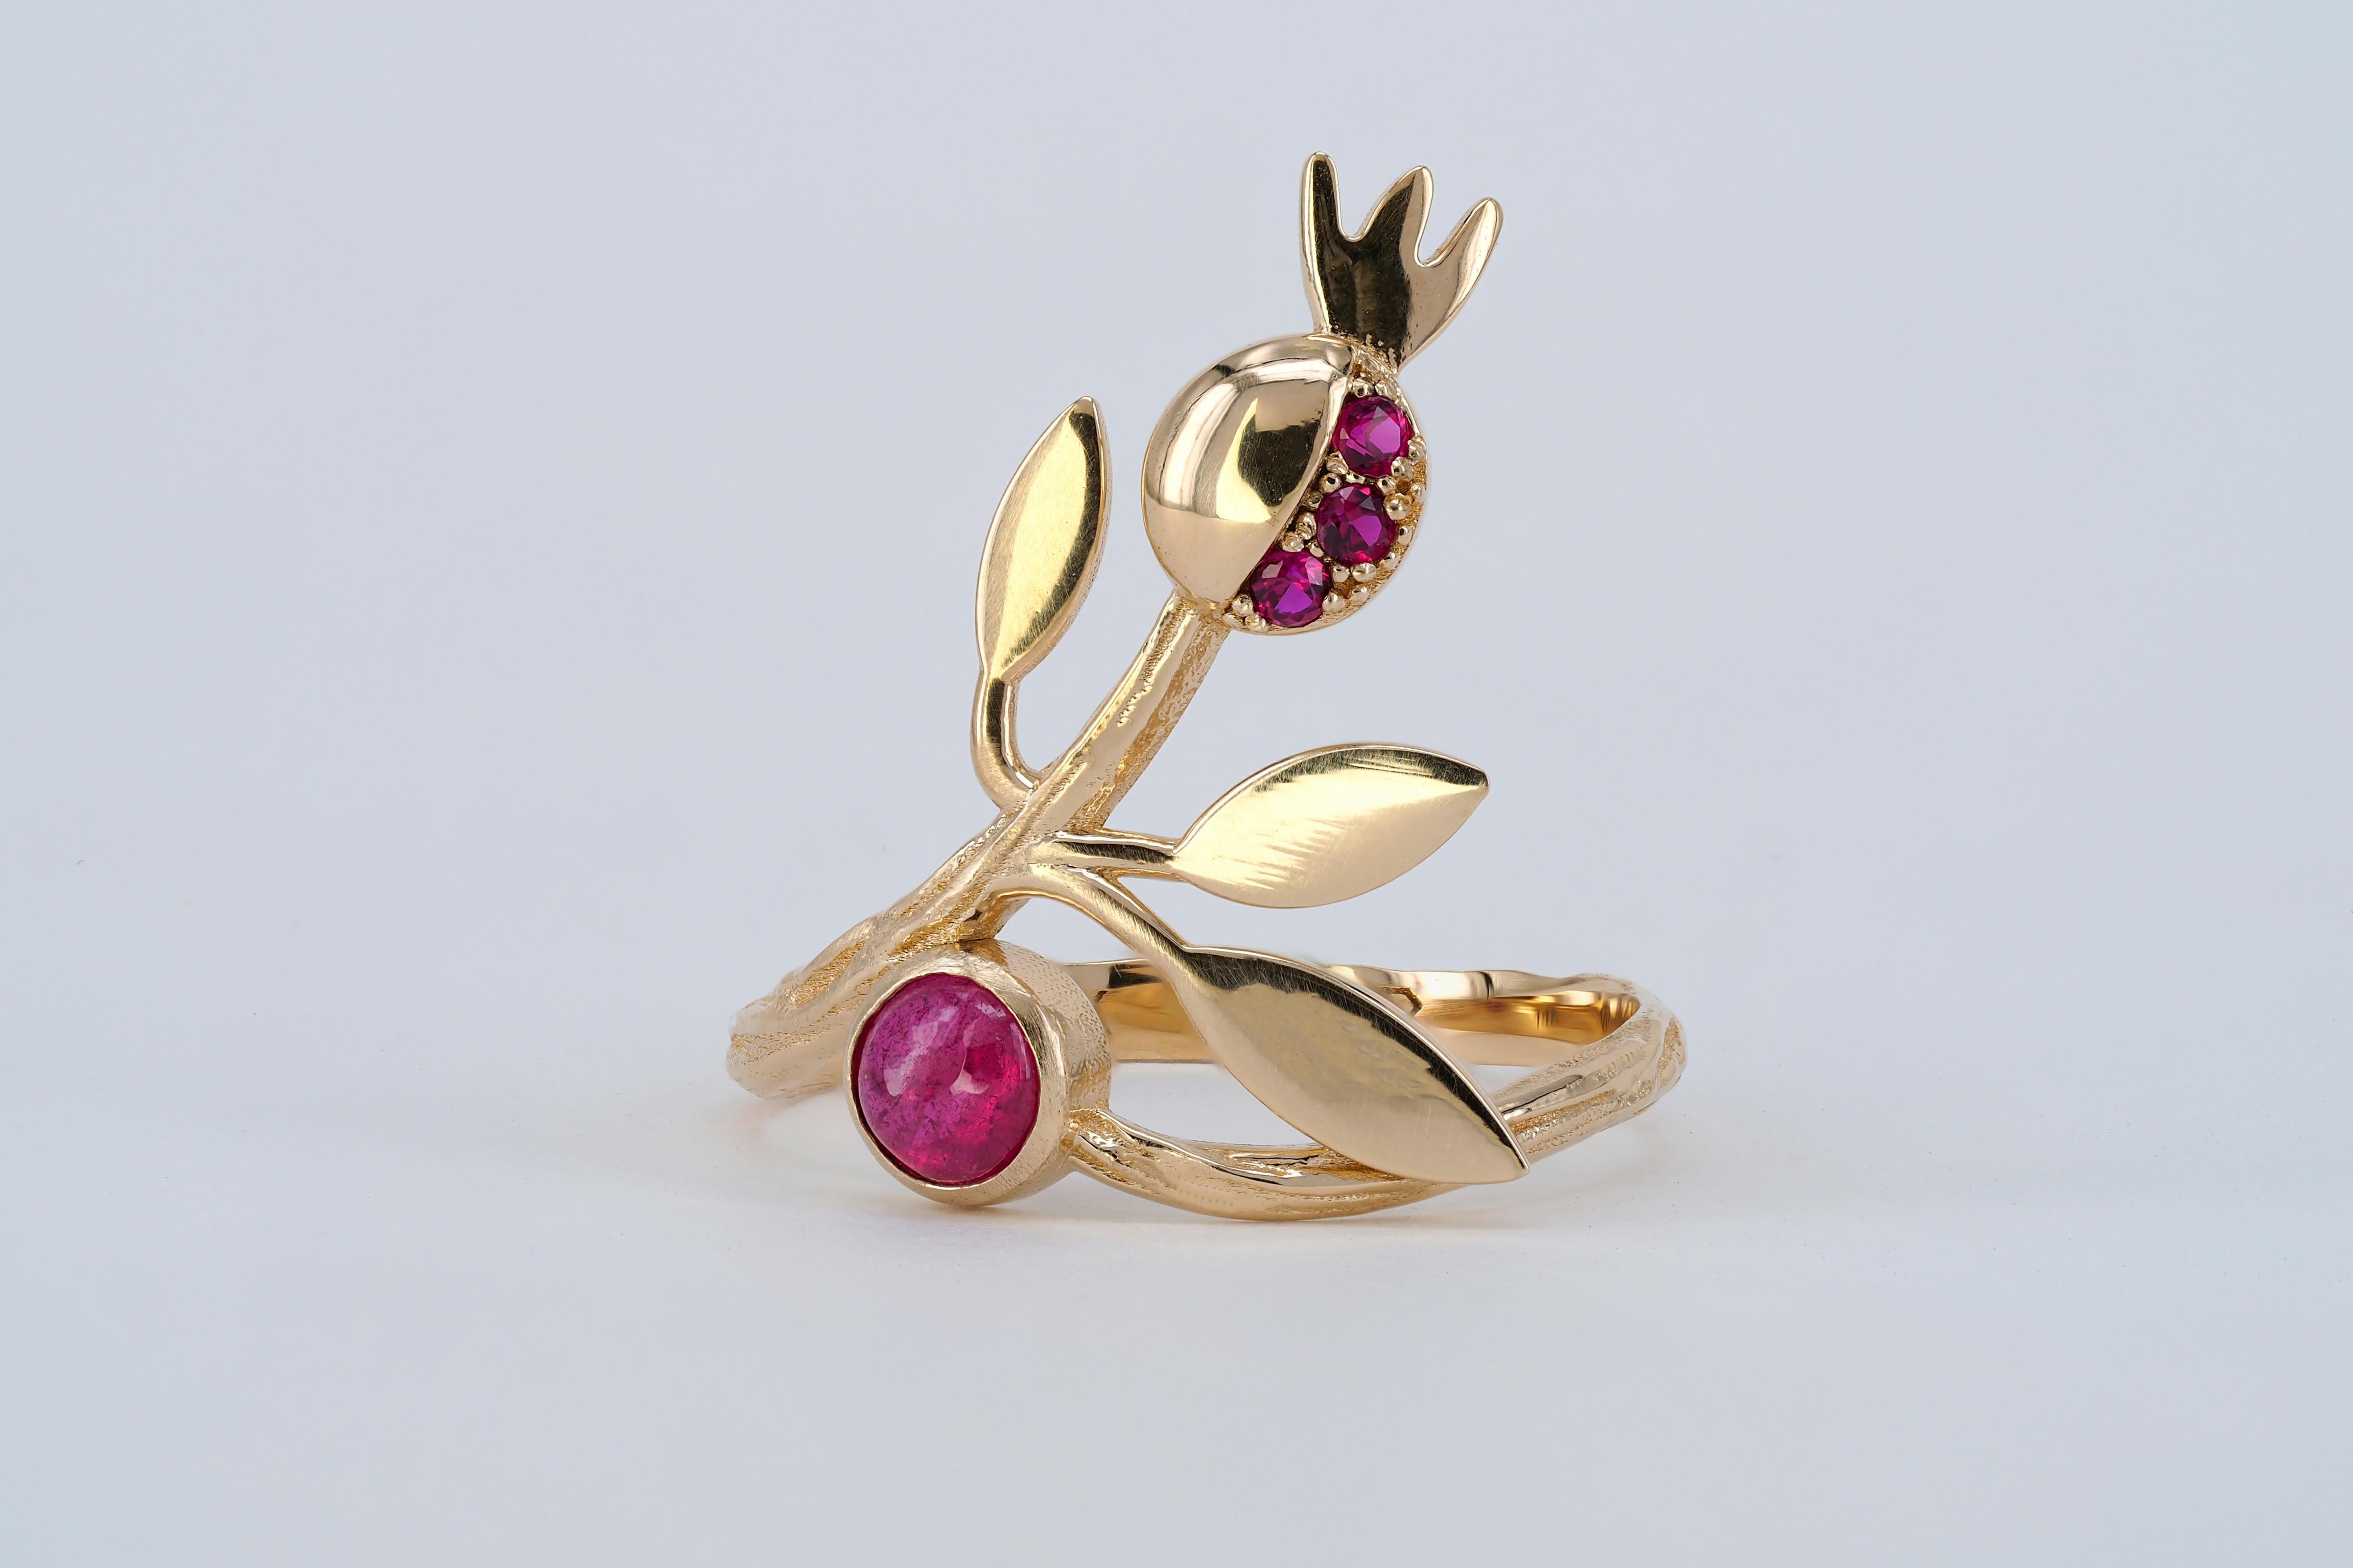 For Sale:  14 karat Gold Ring with Ruby, Sapphires. Pomegranate ring. July birthstone ring! 15